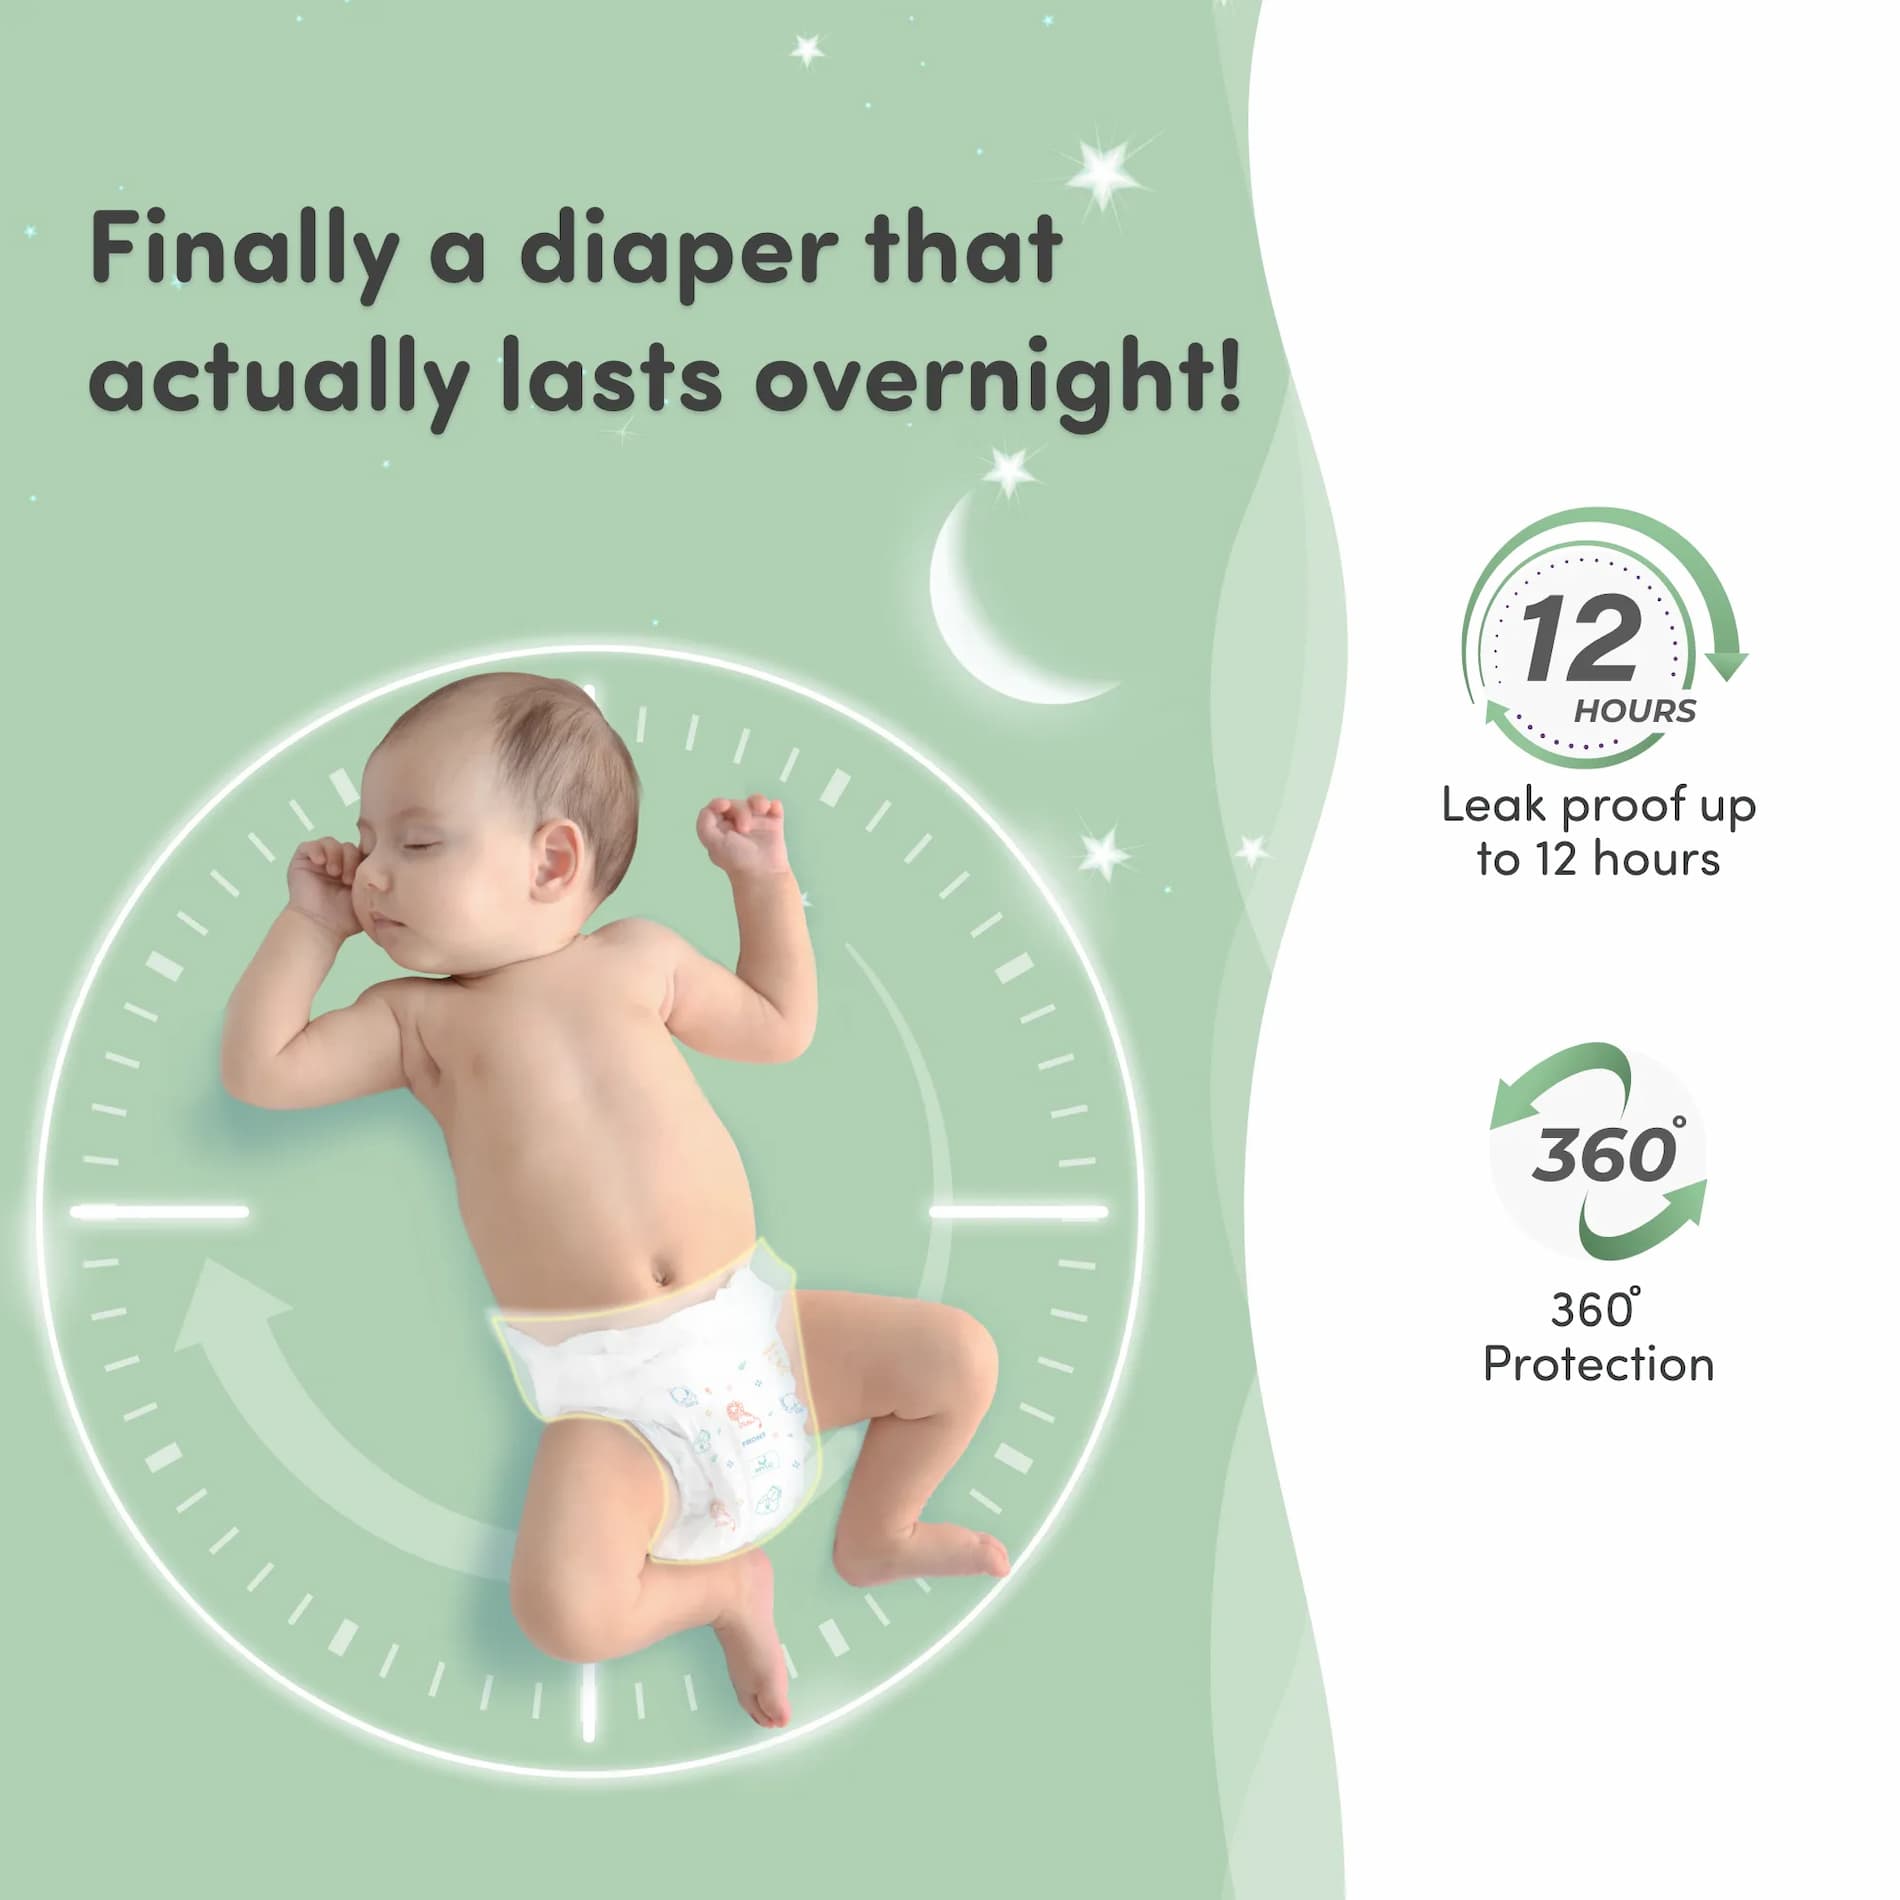 Baby Diaper Pants Small (S) Size 4-8 kgs (126 count) Leak Proof | Lightweight | Rash Free | 12 Hours Protection | ADL Technology (Pack of 3)